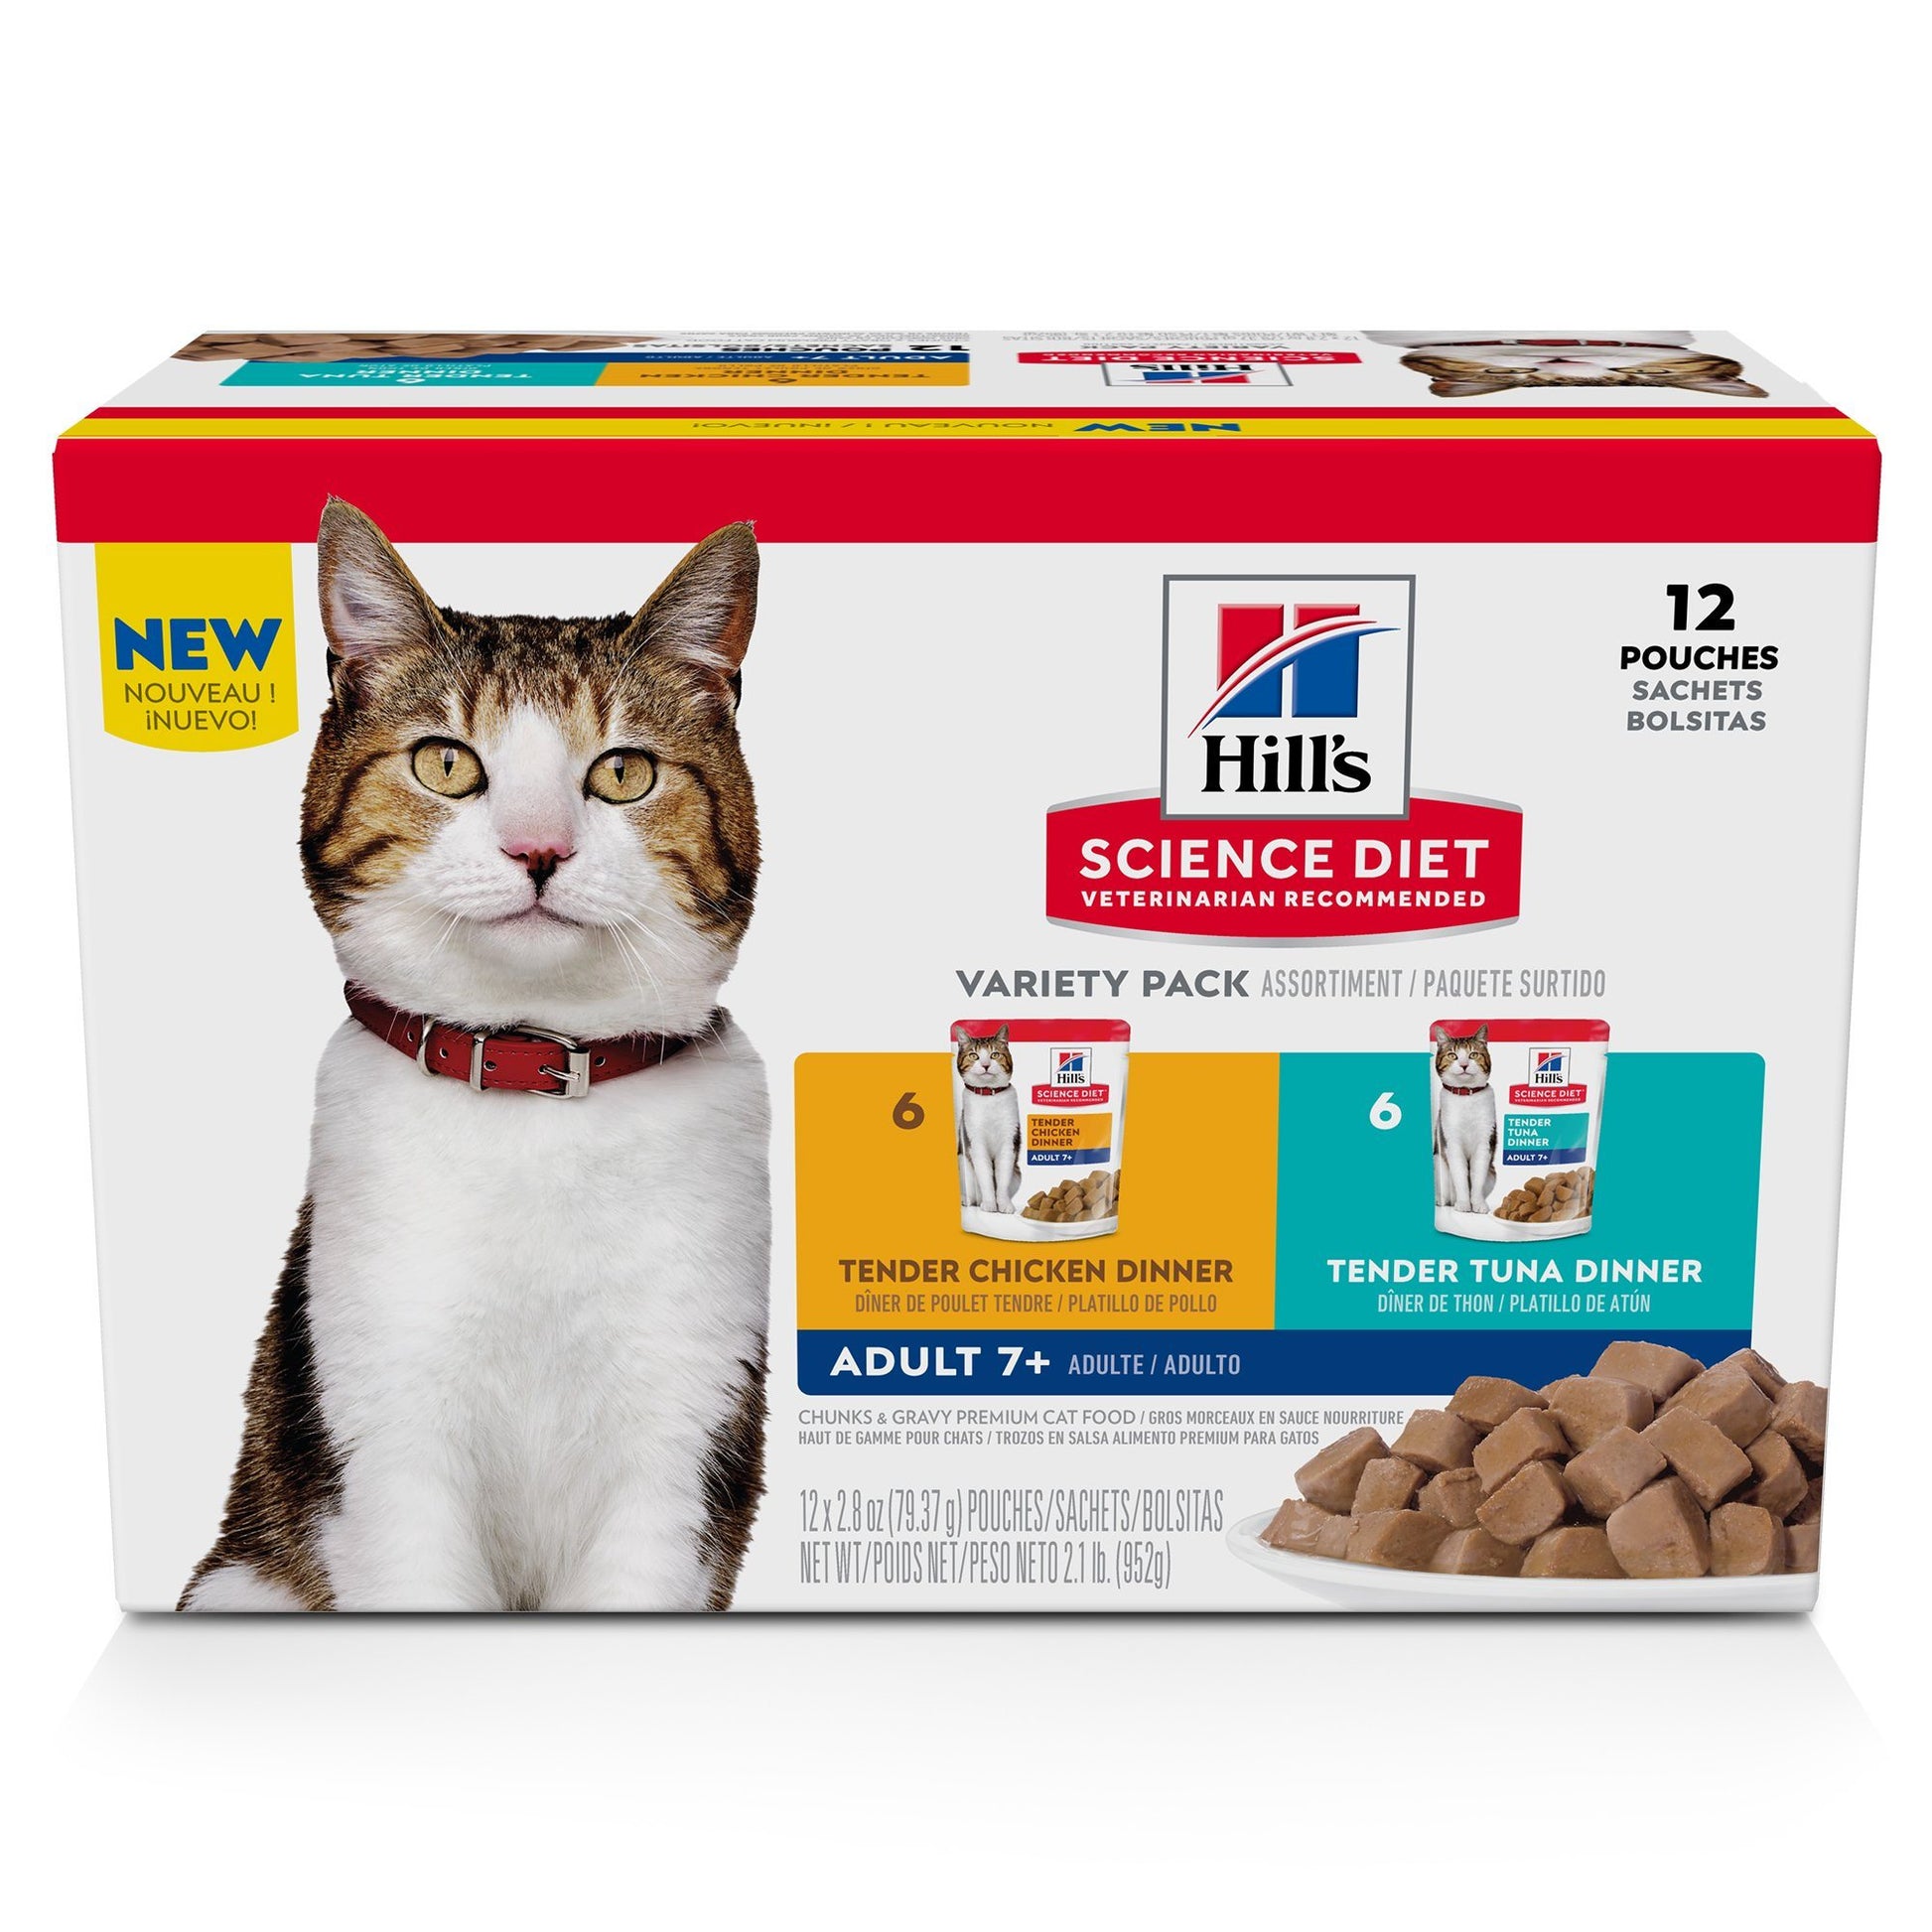 Hill's Science Diet Senior 7+ Wet Cat Food Pouch Variety Pack, Chicken and Tuna 79g pouch 12 pouches Canned Cat Food 12 pouches | PetMax Canada